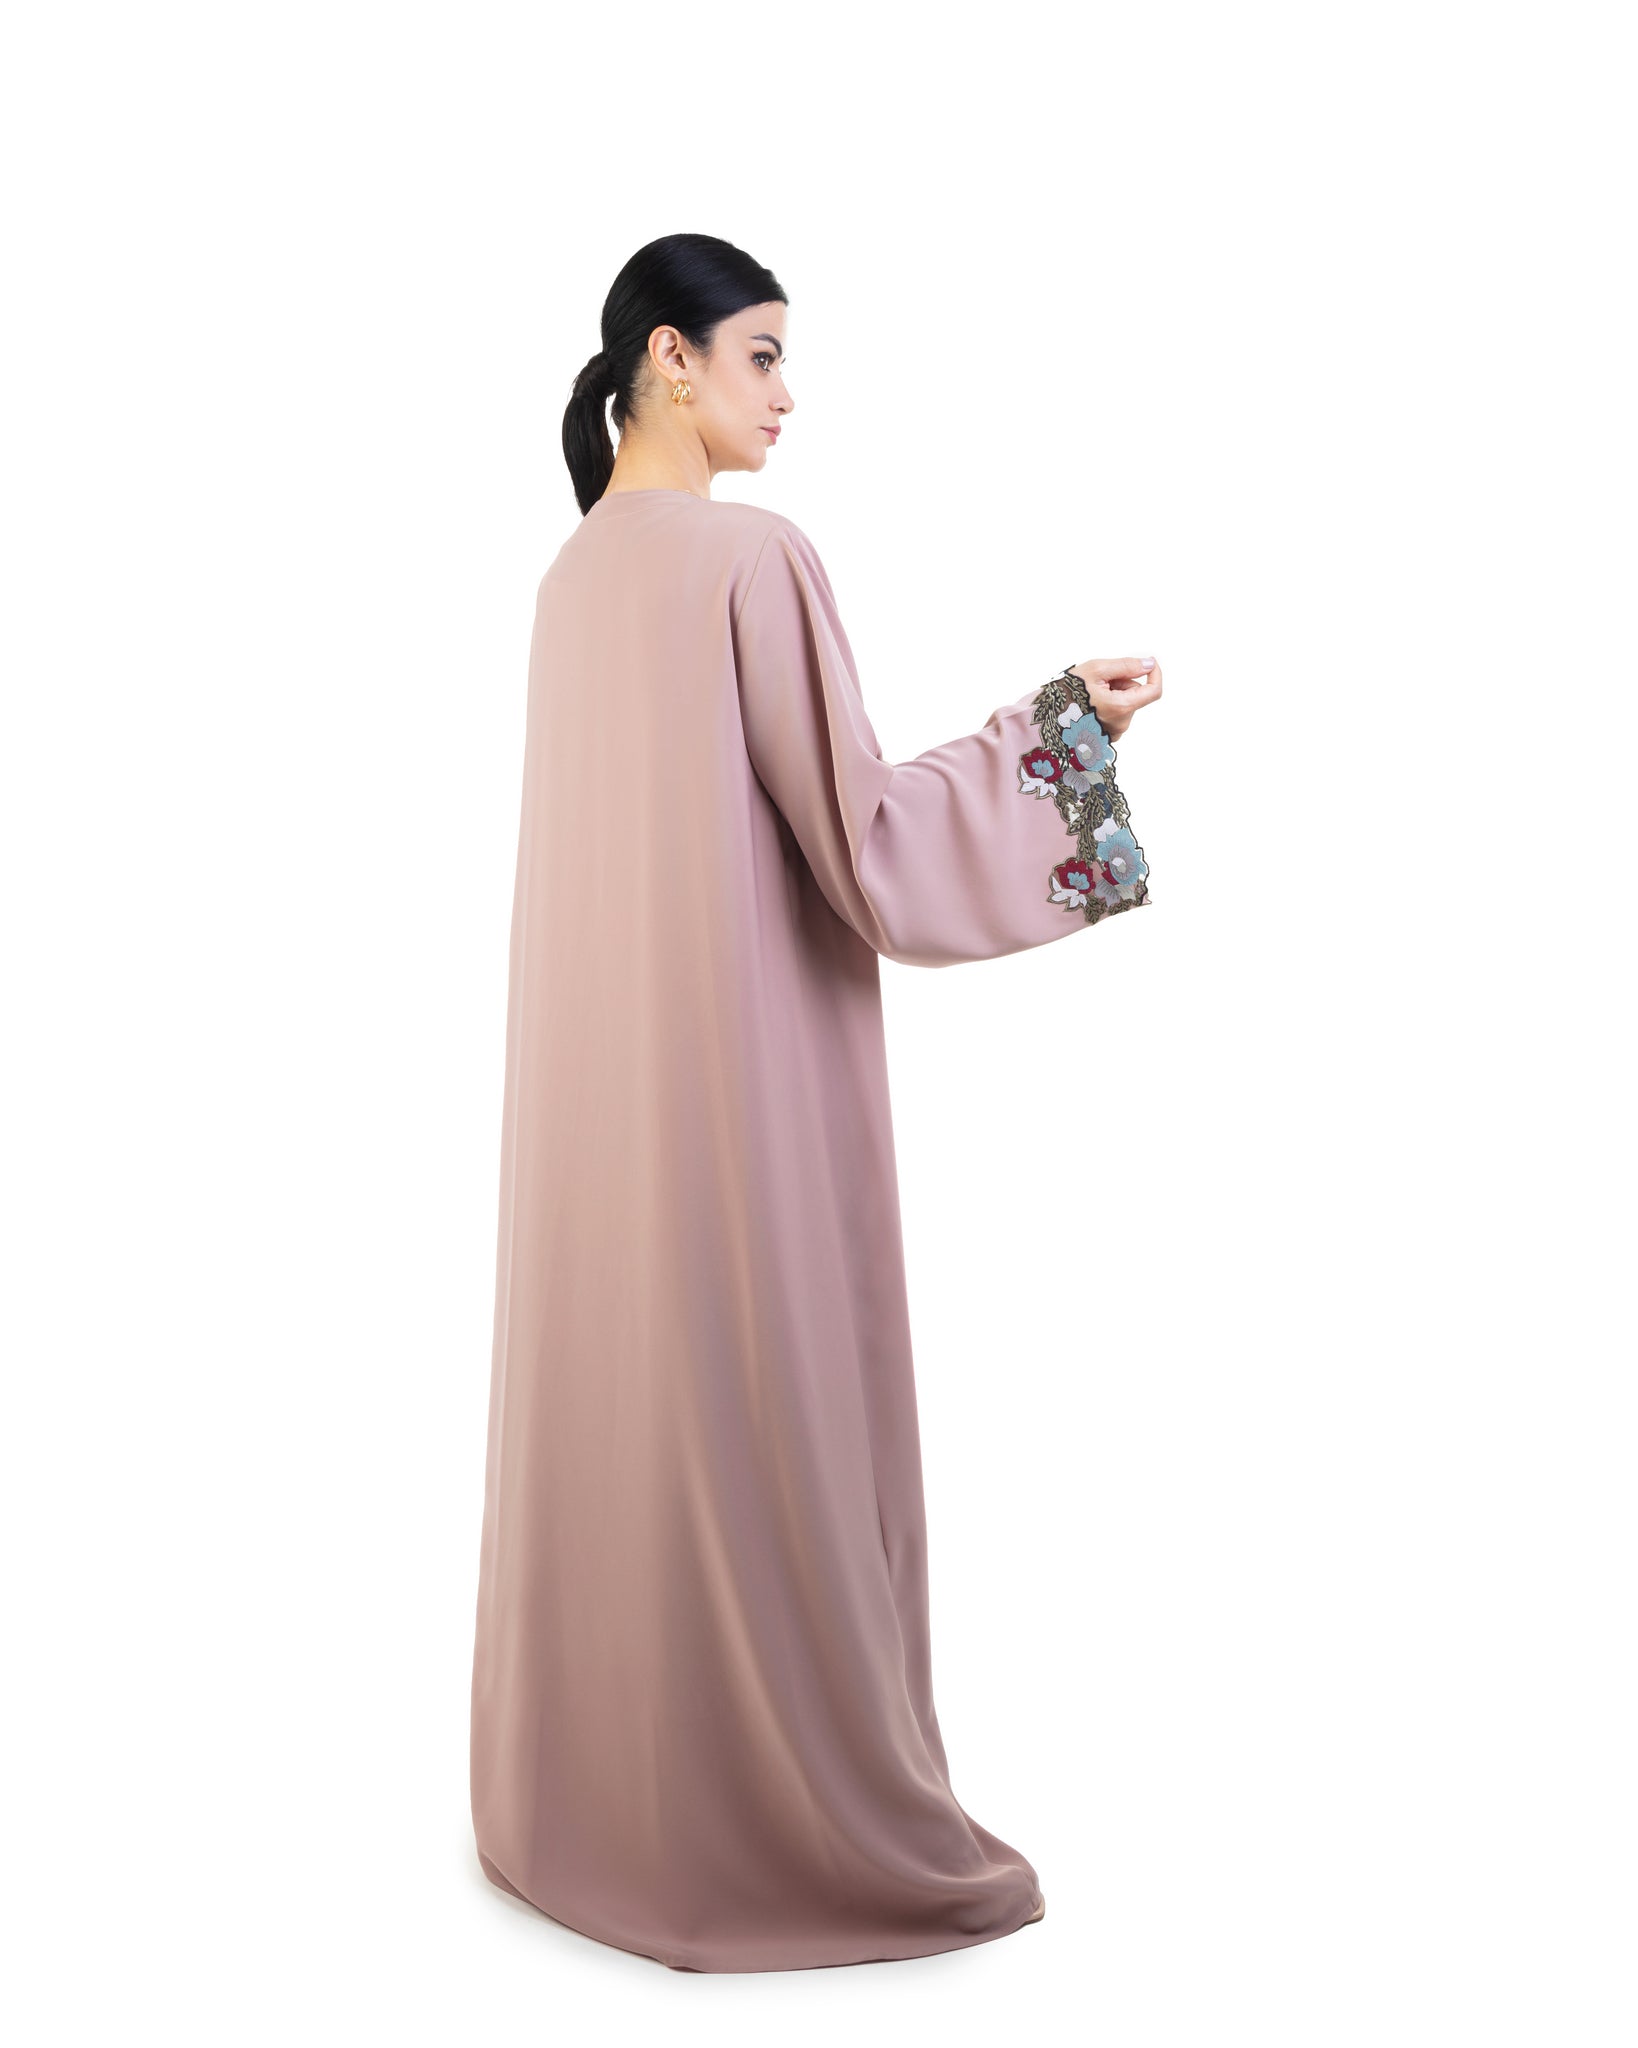 Hanayen Color Abaya With Embroidery Details